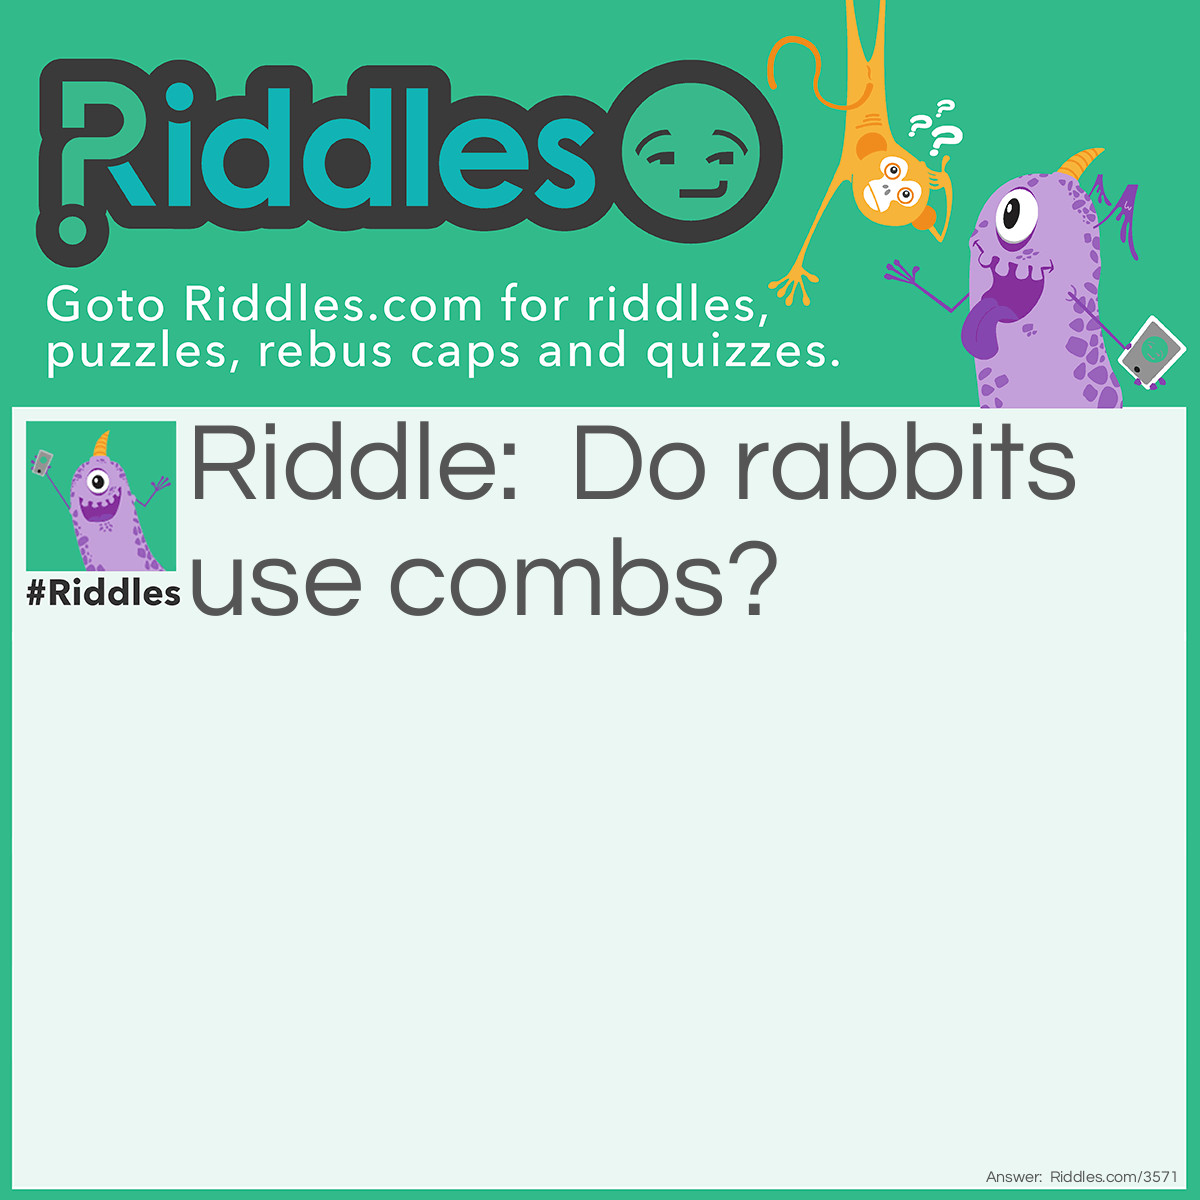 Riddle: Do rabbits use combs? Answer: No, they use hare brushes.